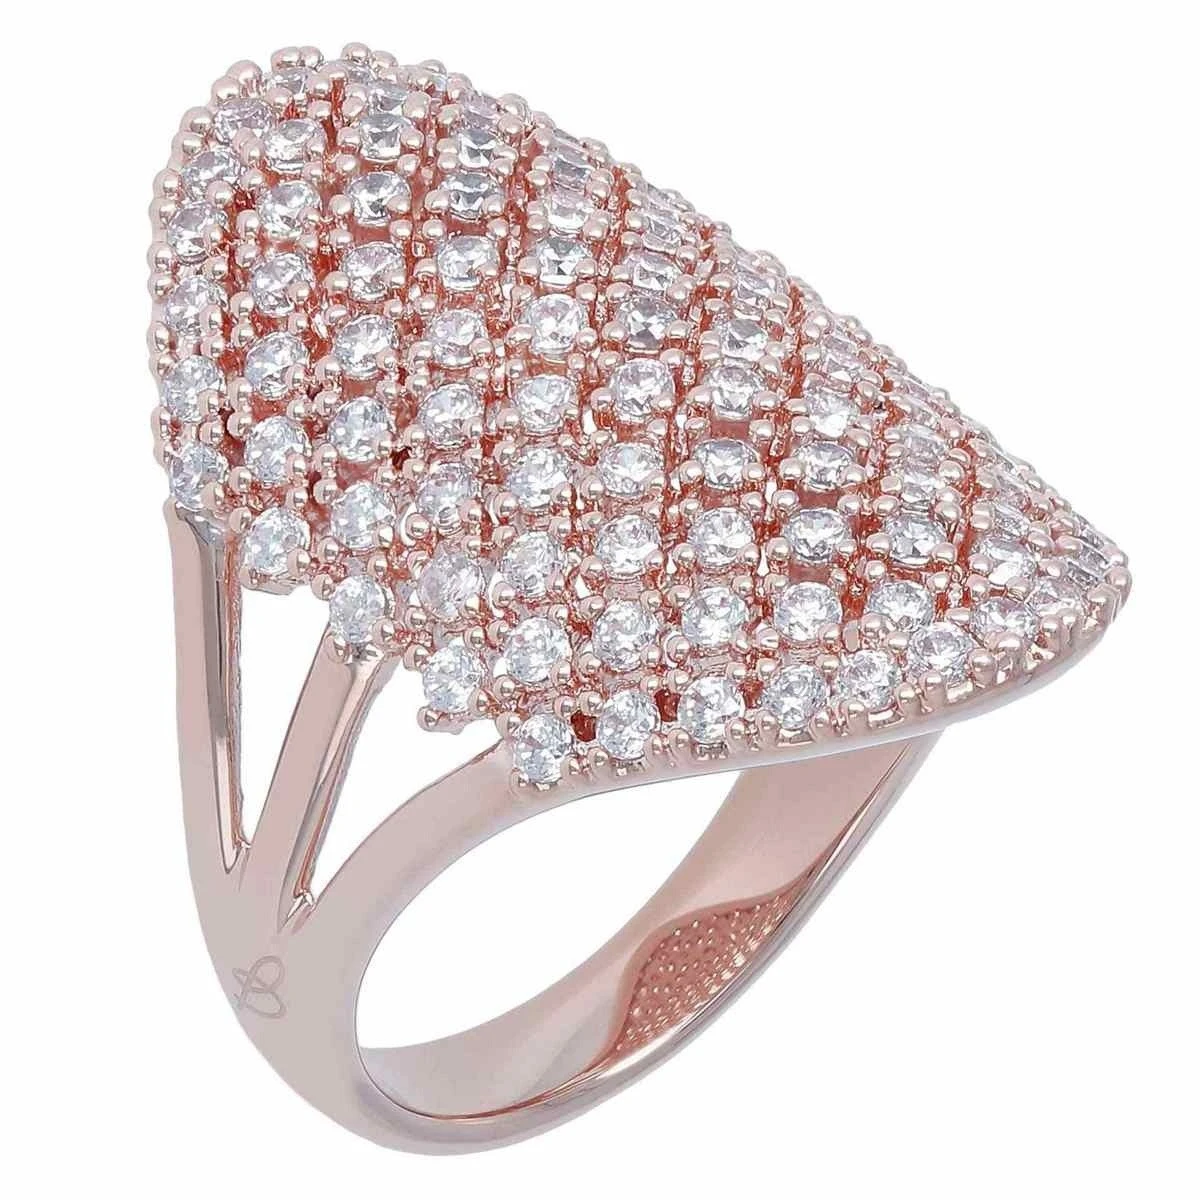 Wholesale OEM/ODM Jewelry Rose gold plated CZ ring in 925 sterling silver  design custom fine jewelry wholesaler suppliers